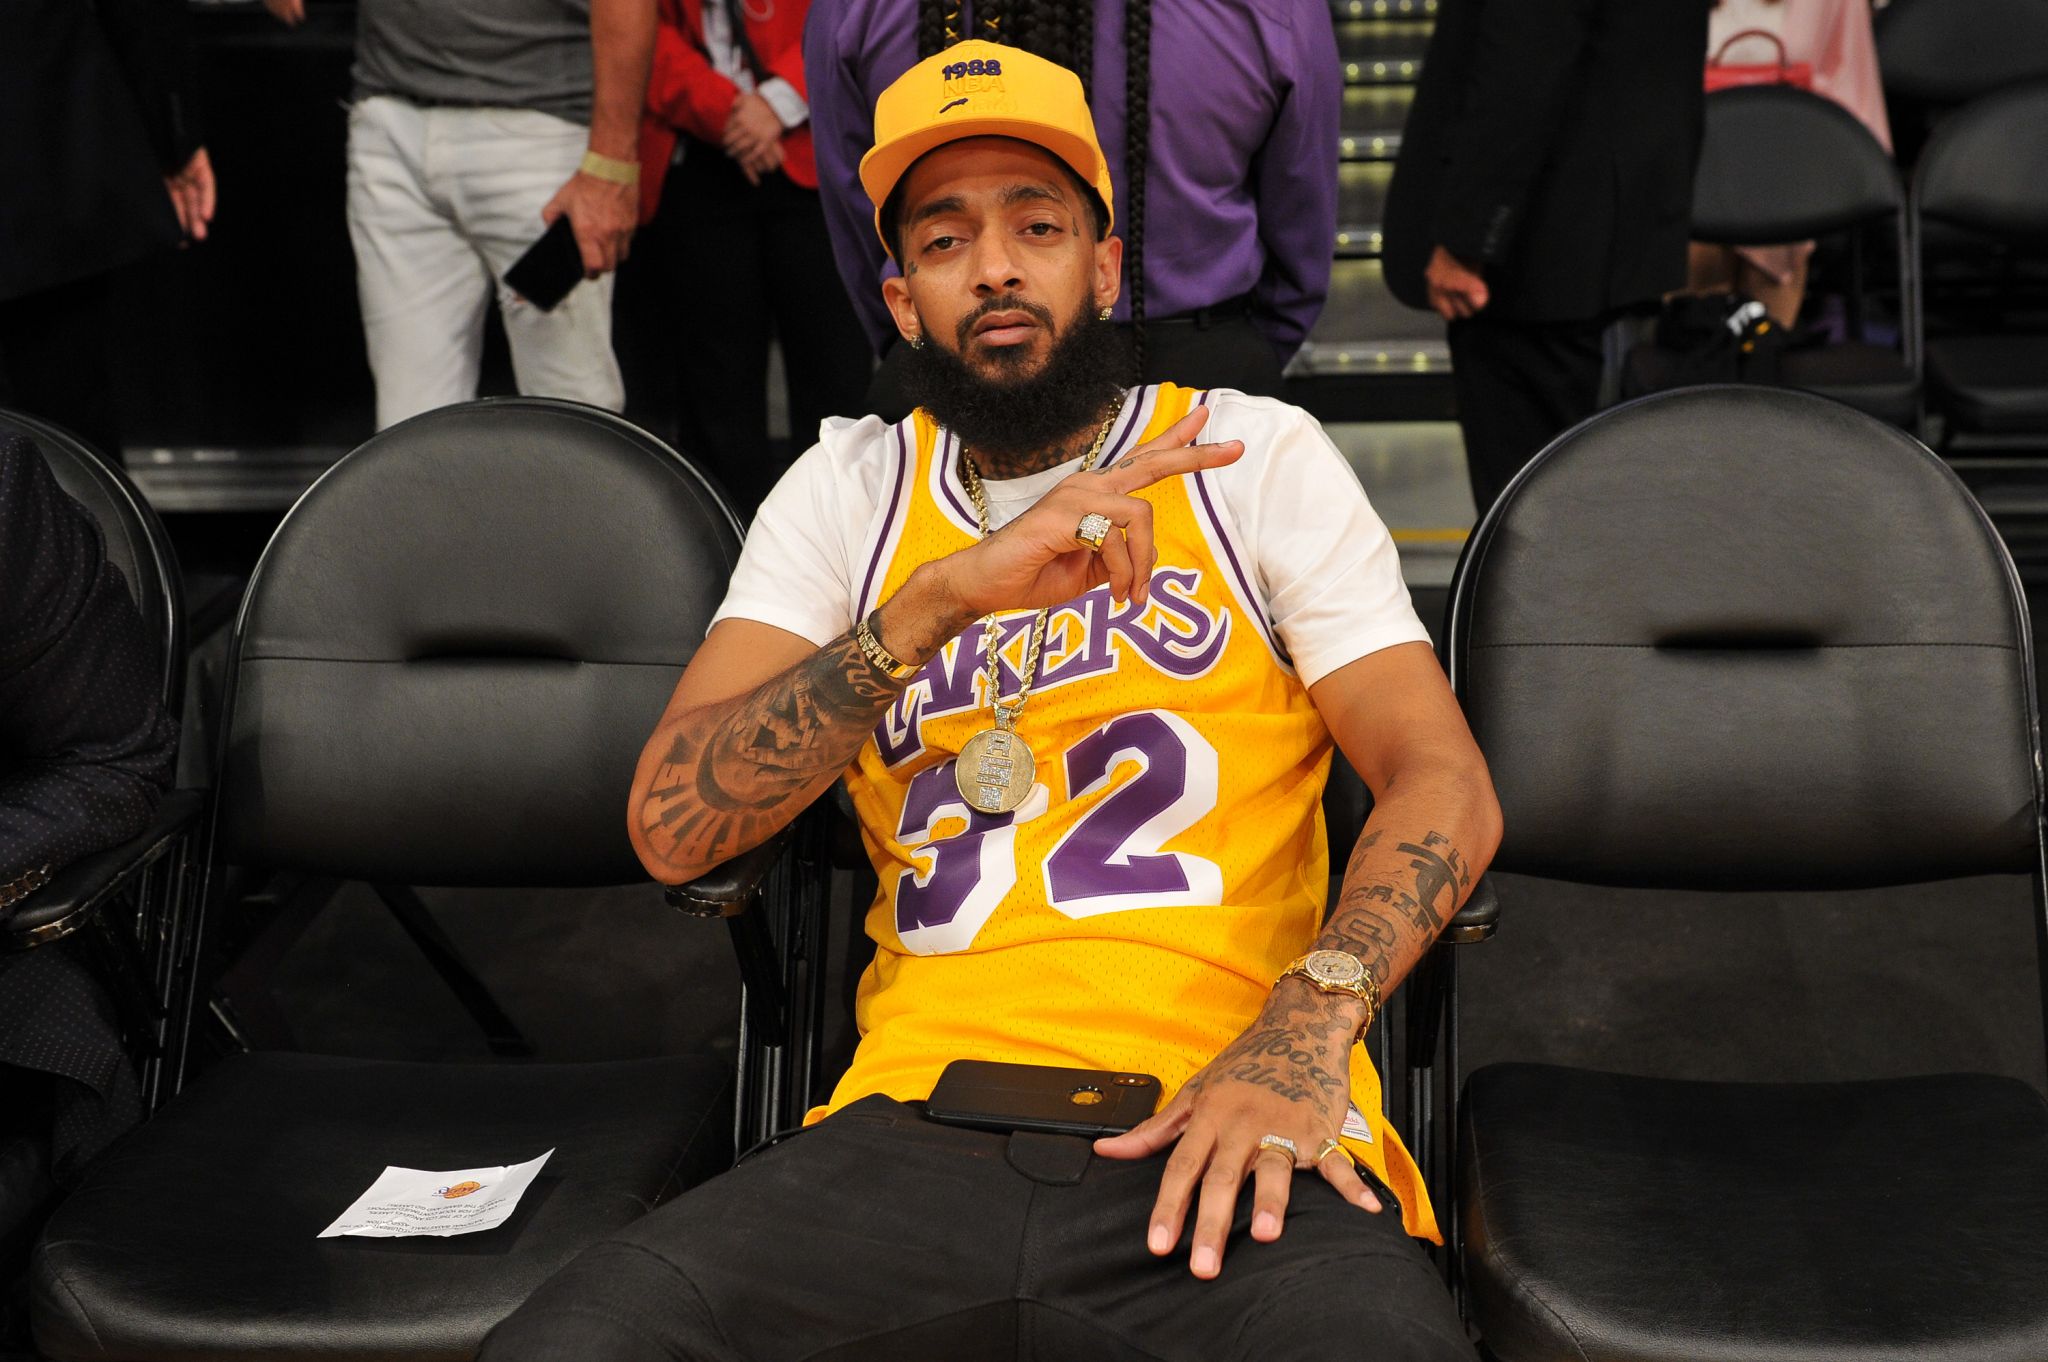 Lakers Games: Who Sits Where (map) – The Hollywood Reporter